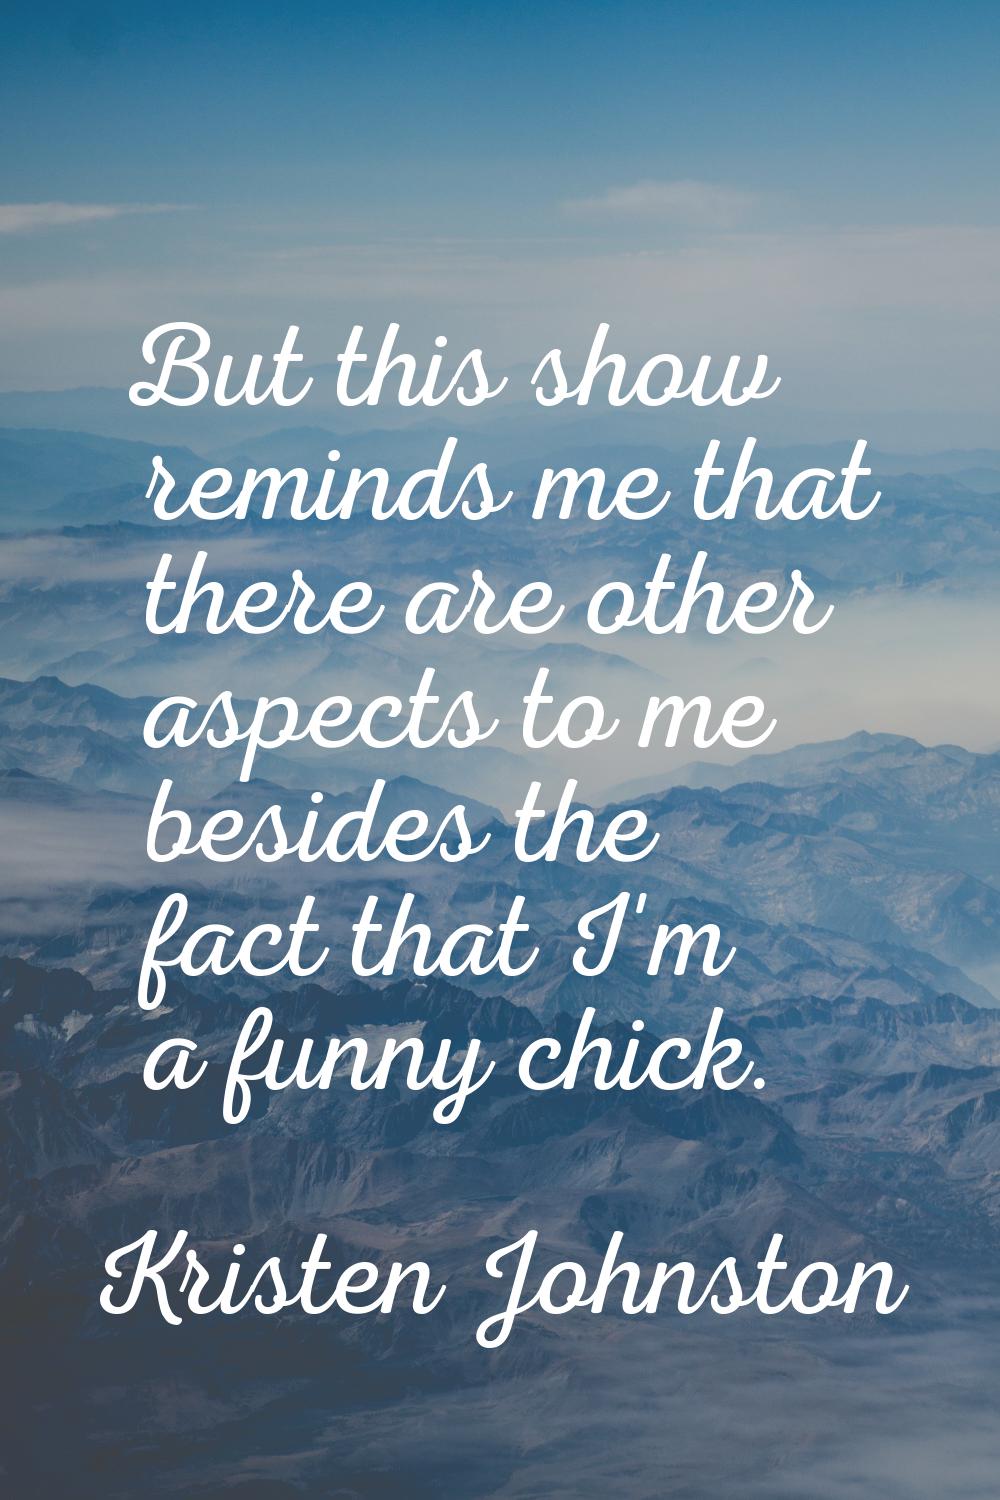 But this show reminds me that there are other aspects to me besides the fact that I'm a funny chick